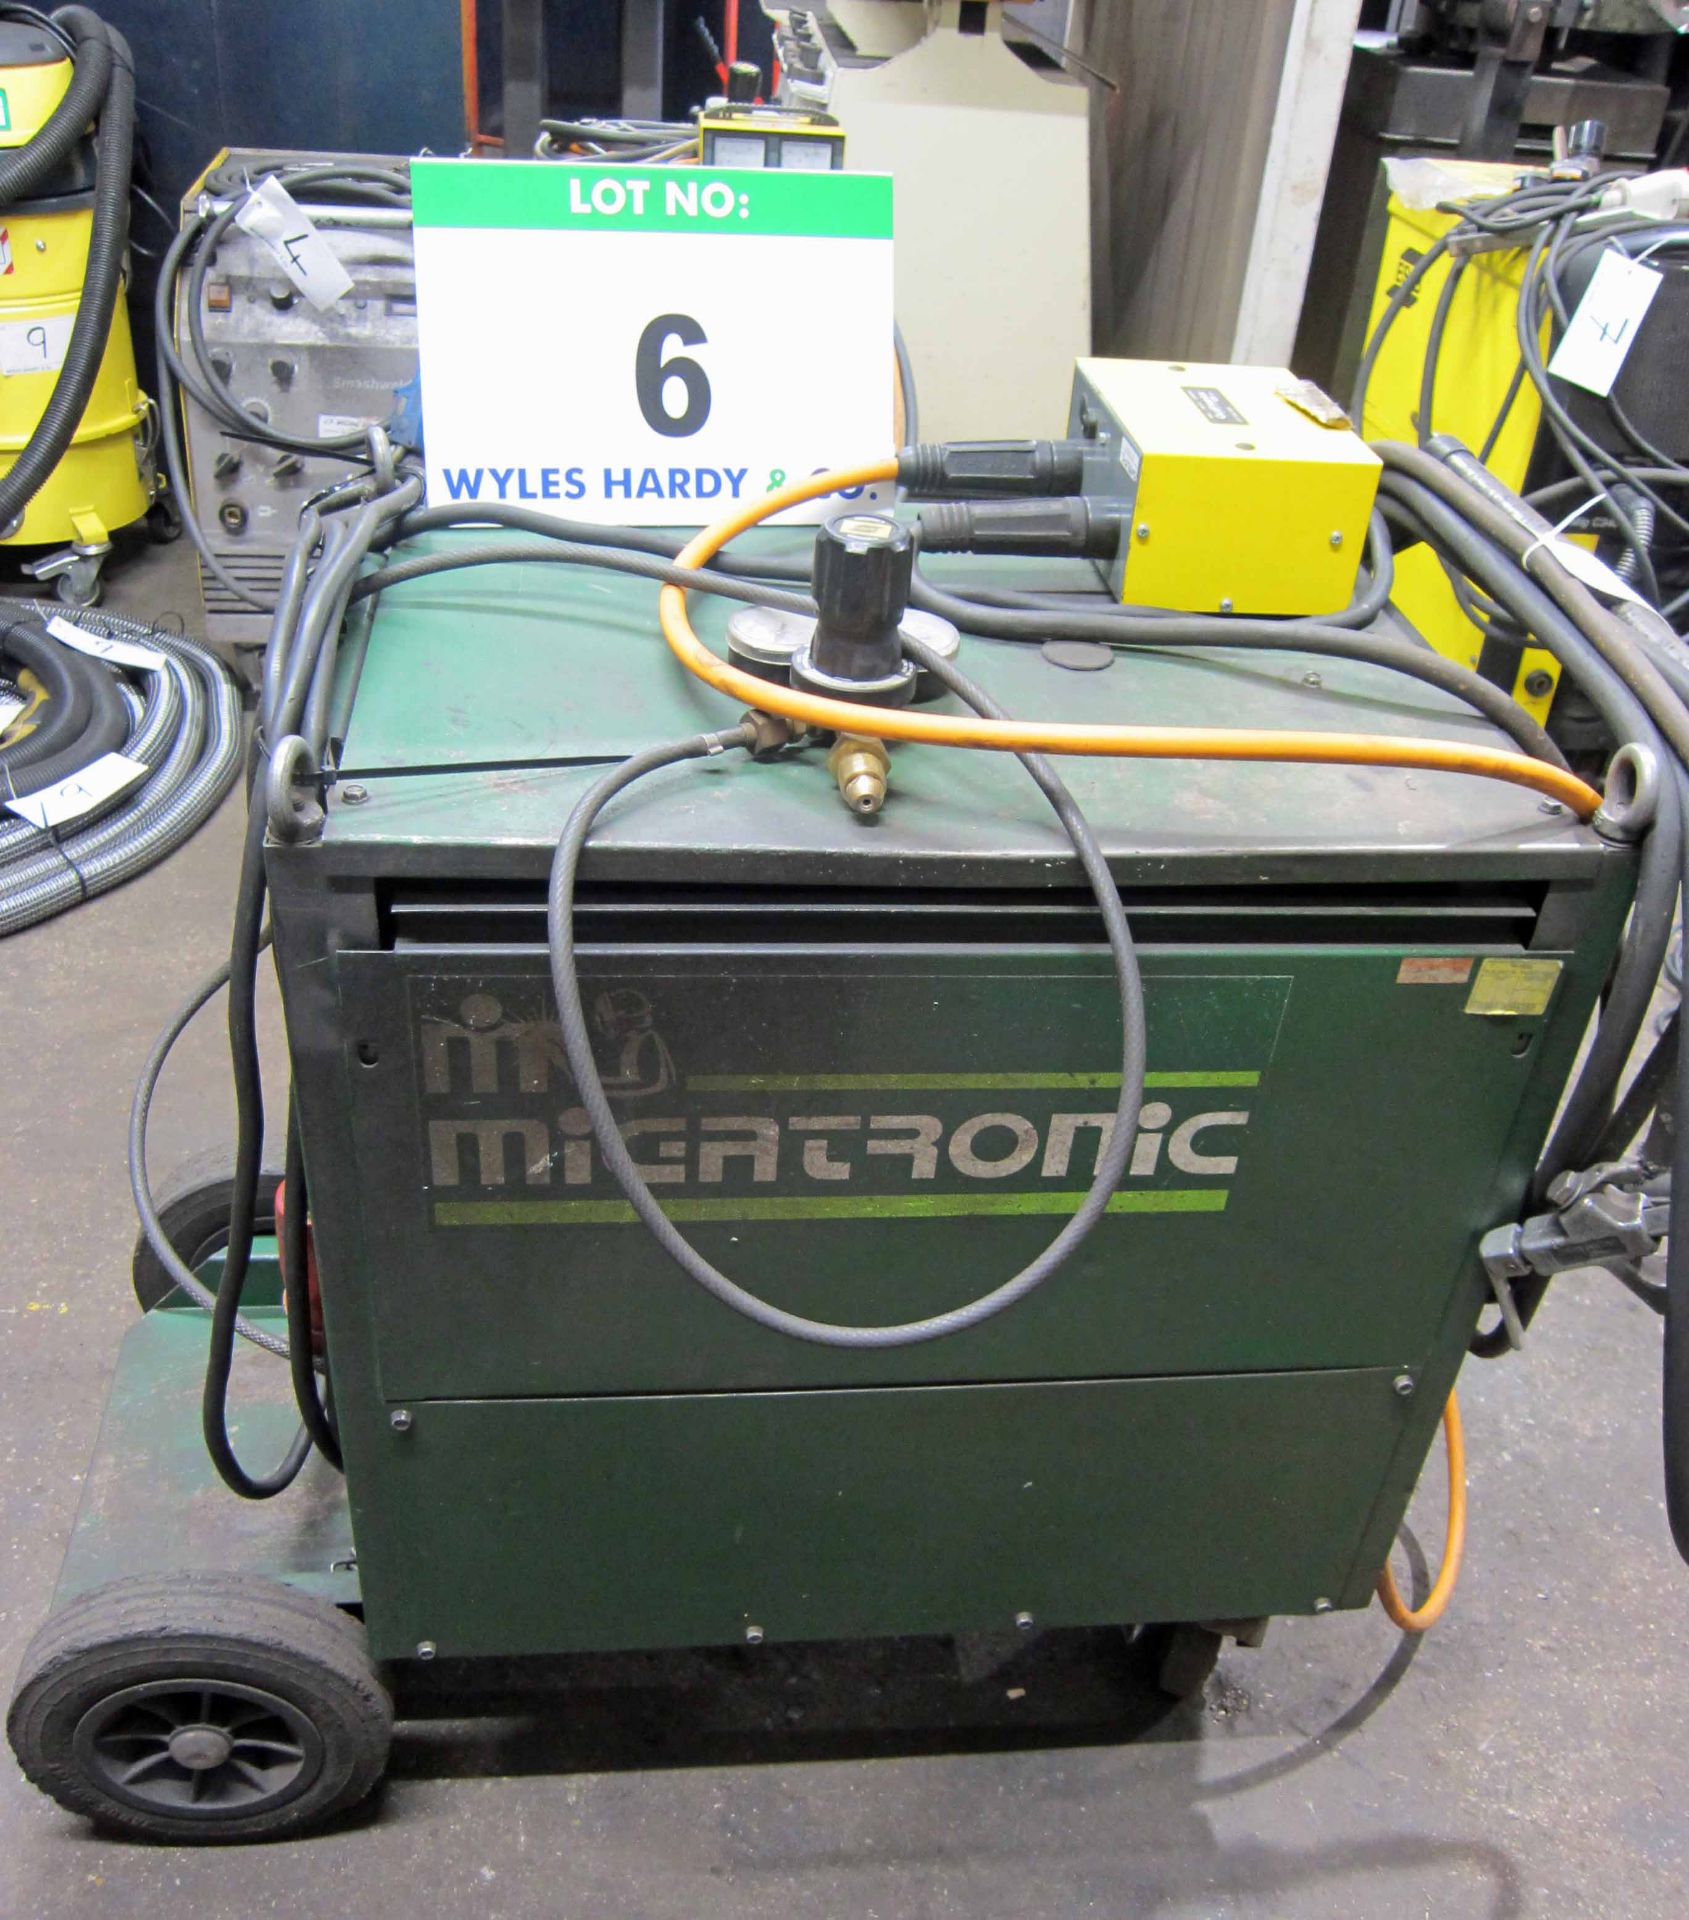 A MIGTRONIC Model Dyna Mig 335 Mig Welder (KDO335) complete with QUALITRONICS Voltage and Amp and - Image 3 of 7